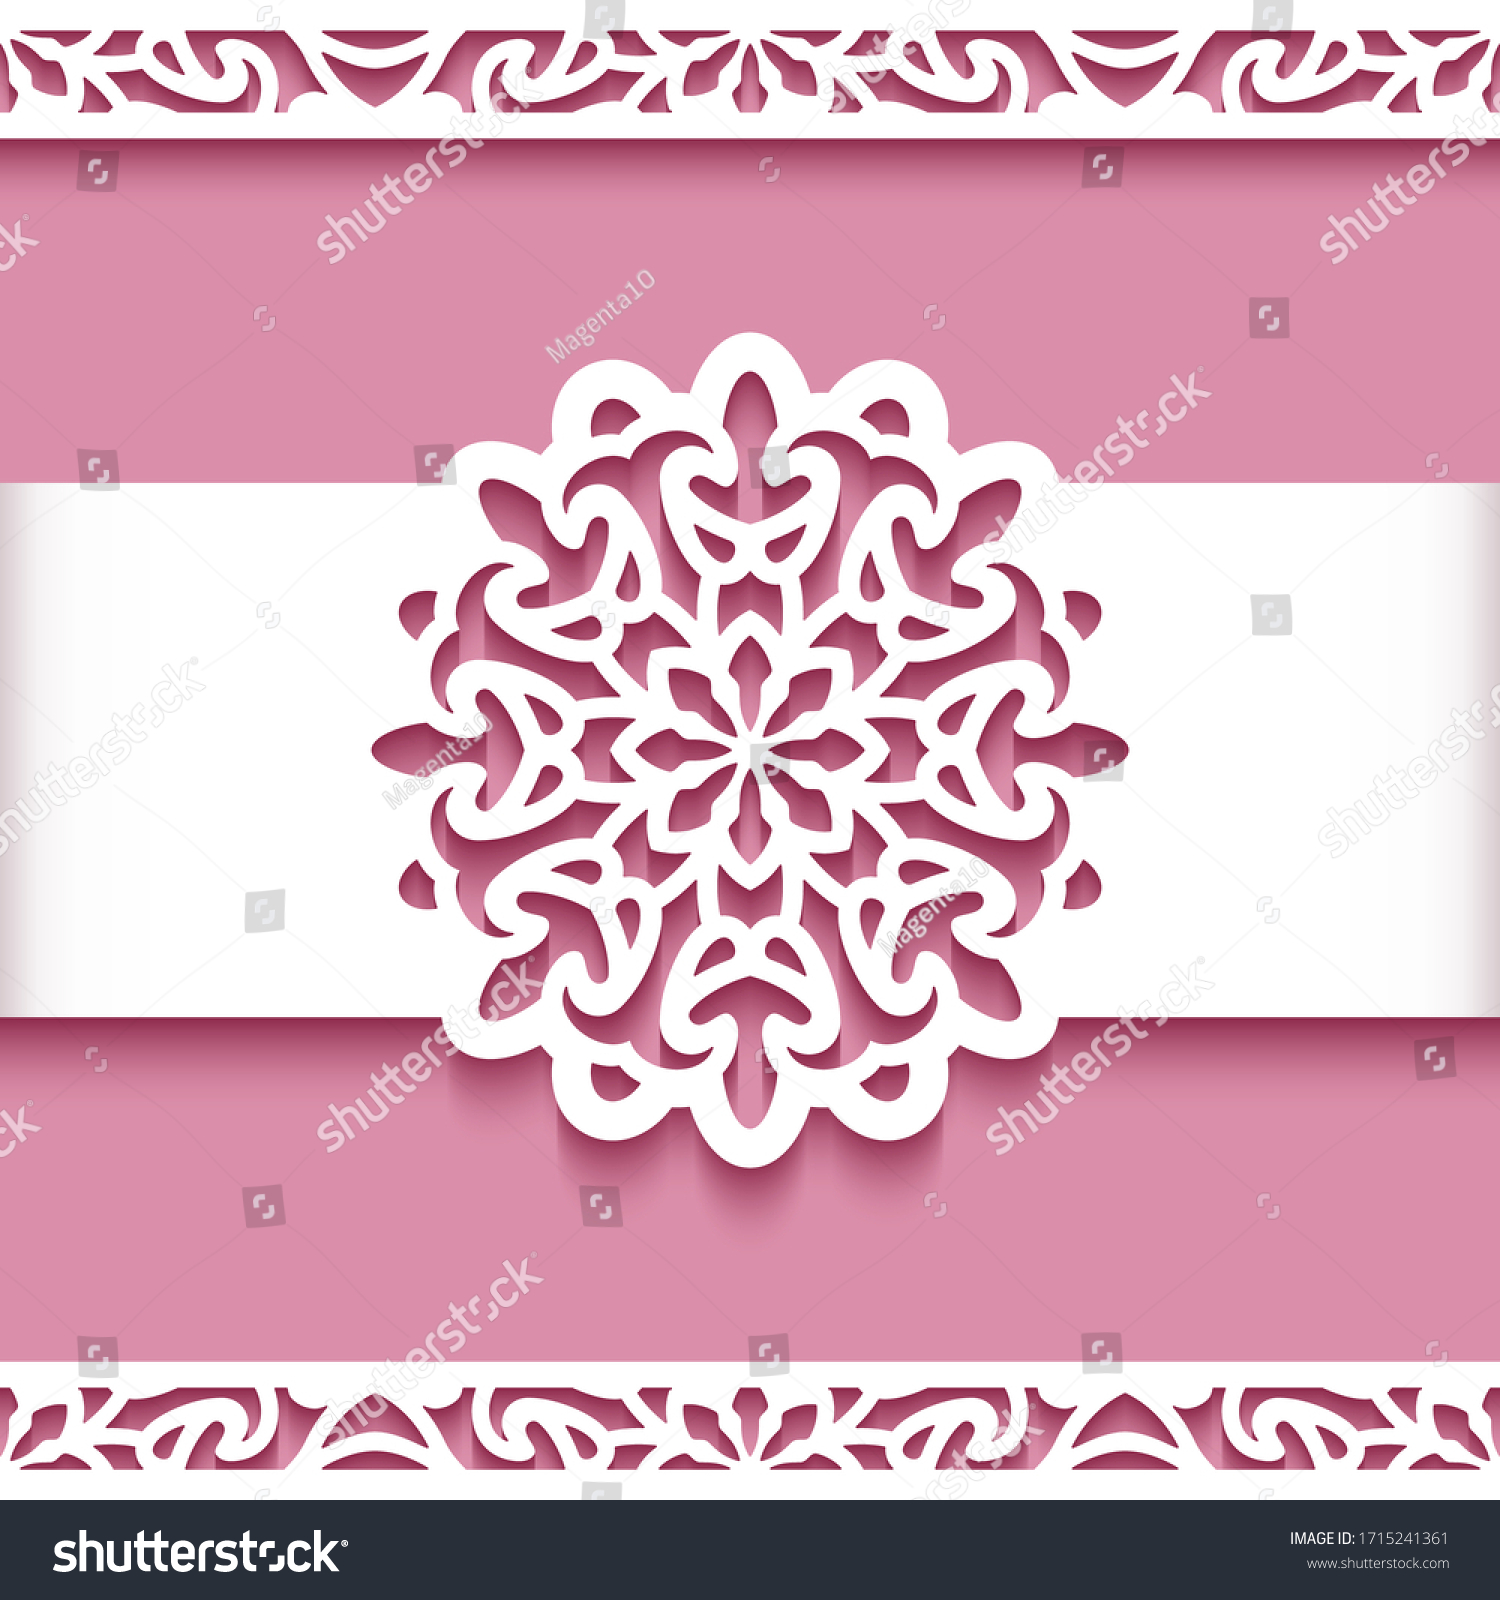 SVG of Belly band decoration and seamless border patterns. Cutout paper frame. Vintage vector template for laser cutting or plotter printing. Elegant lace ornaments for wedding invitation card design. svg